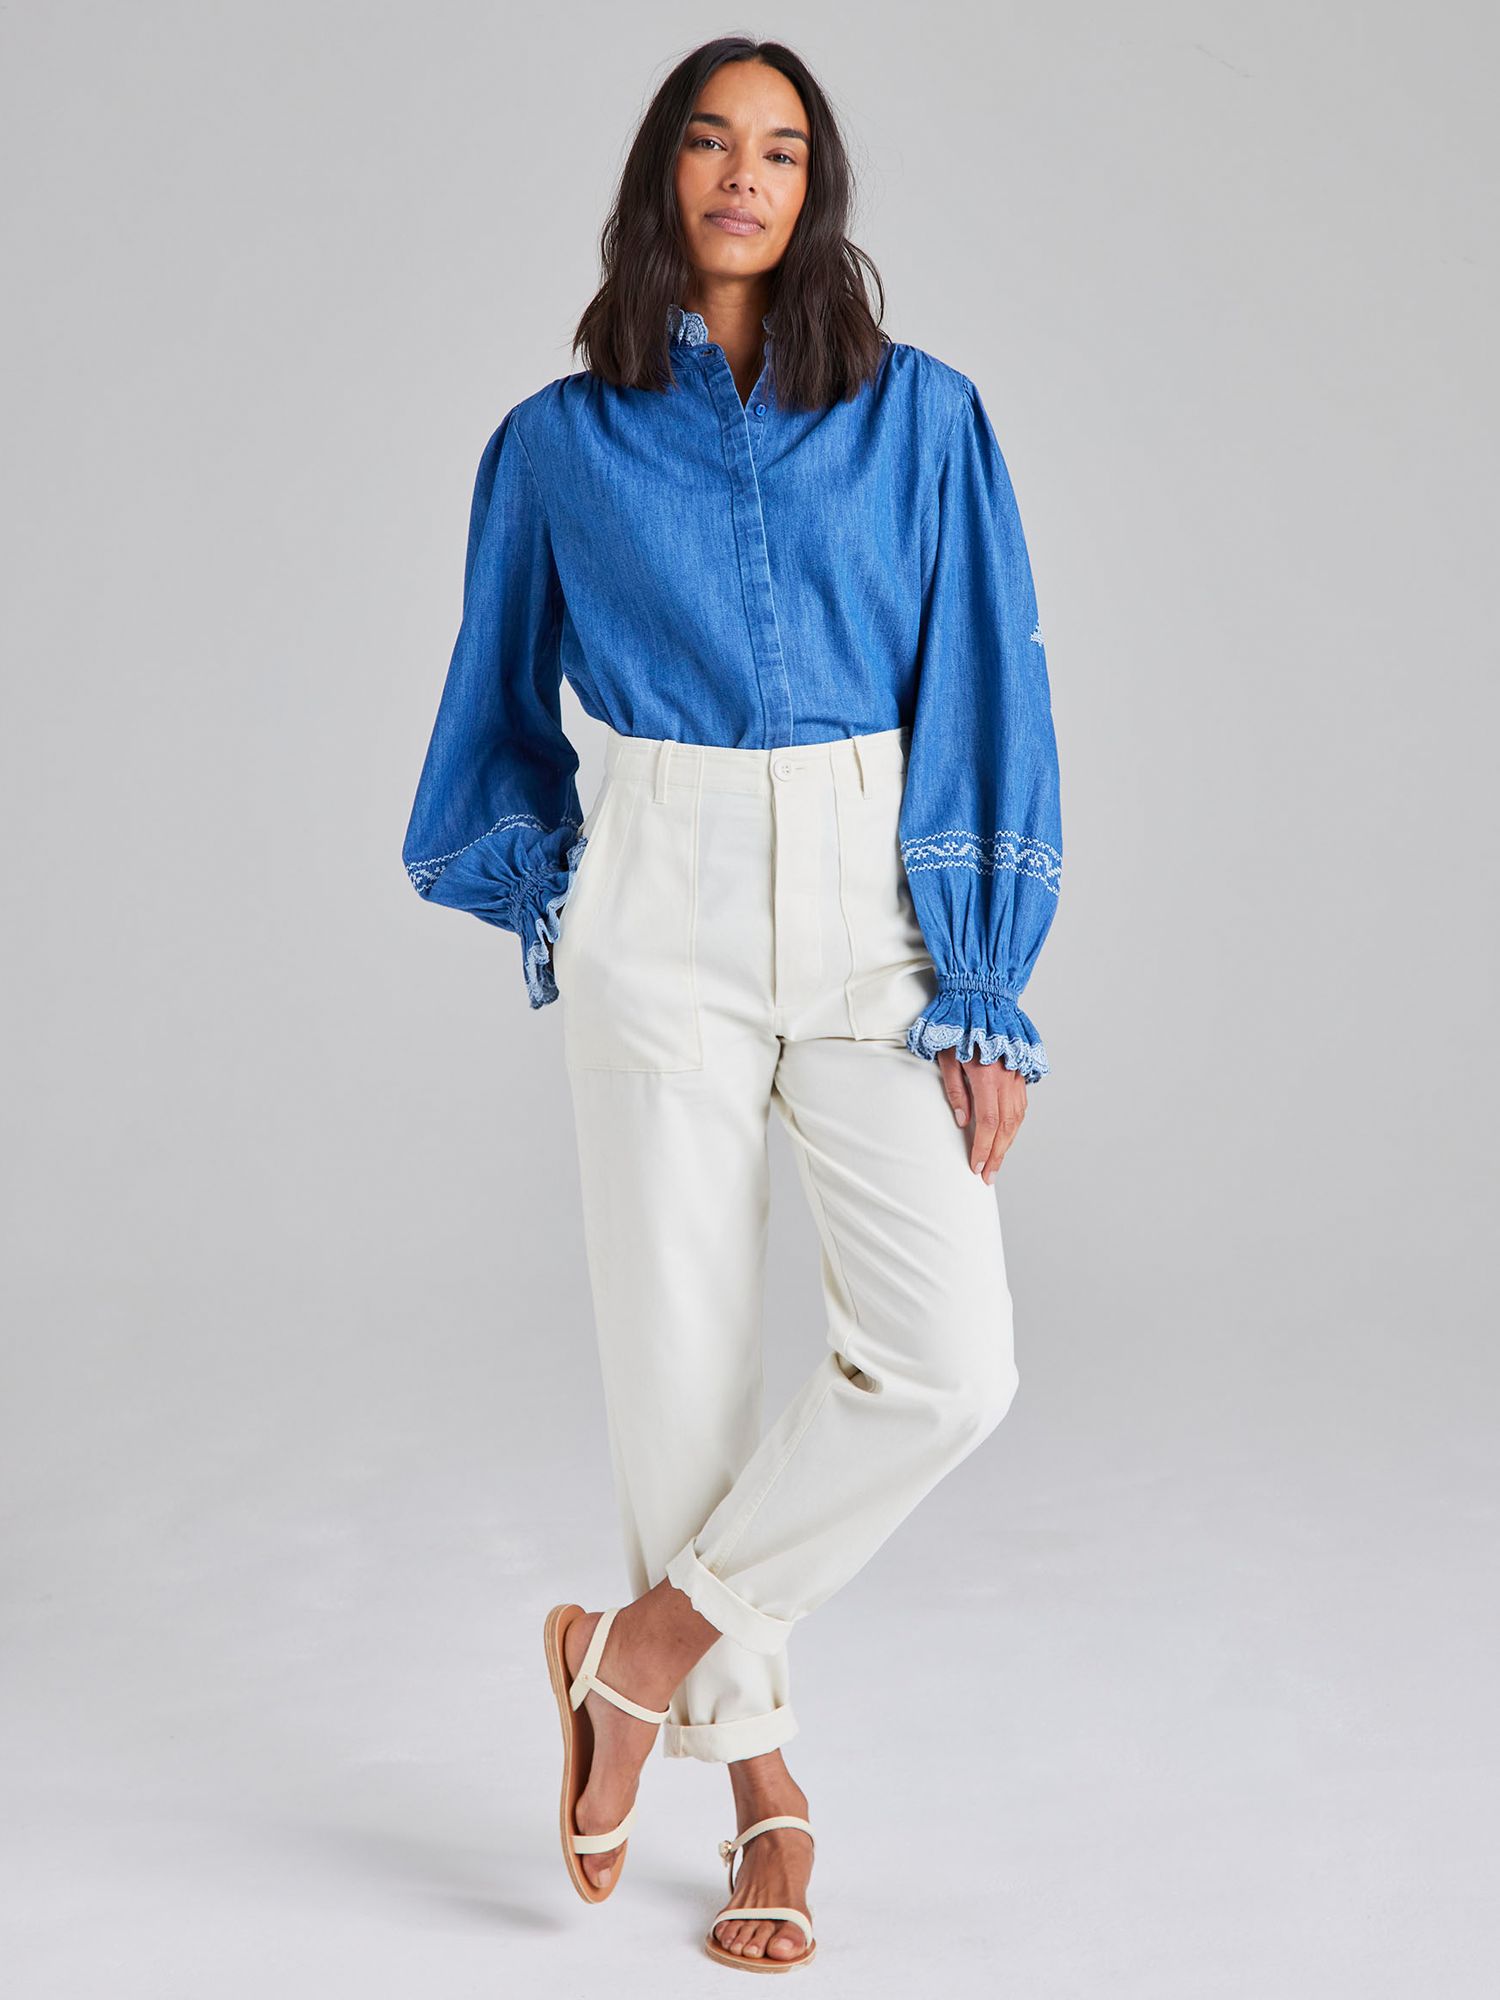 Buy Cape Cove Cow Parsley Embroidered Denim Blouse, Blue Online at johnlewis.com